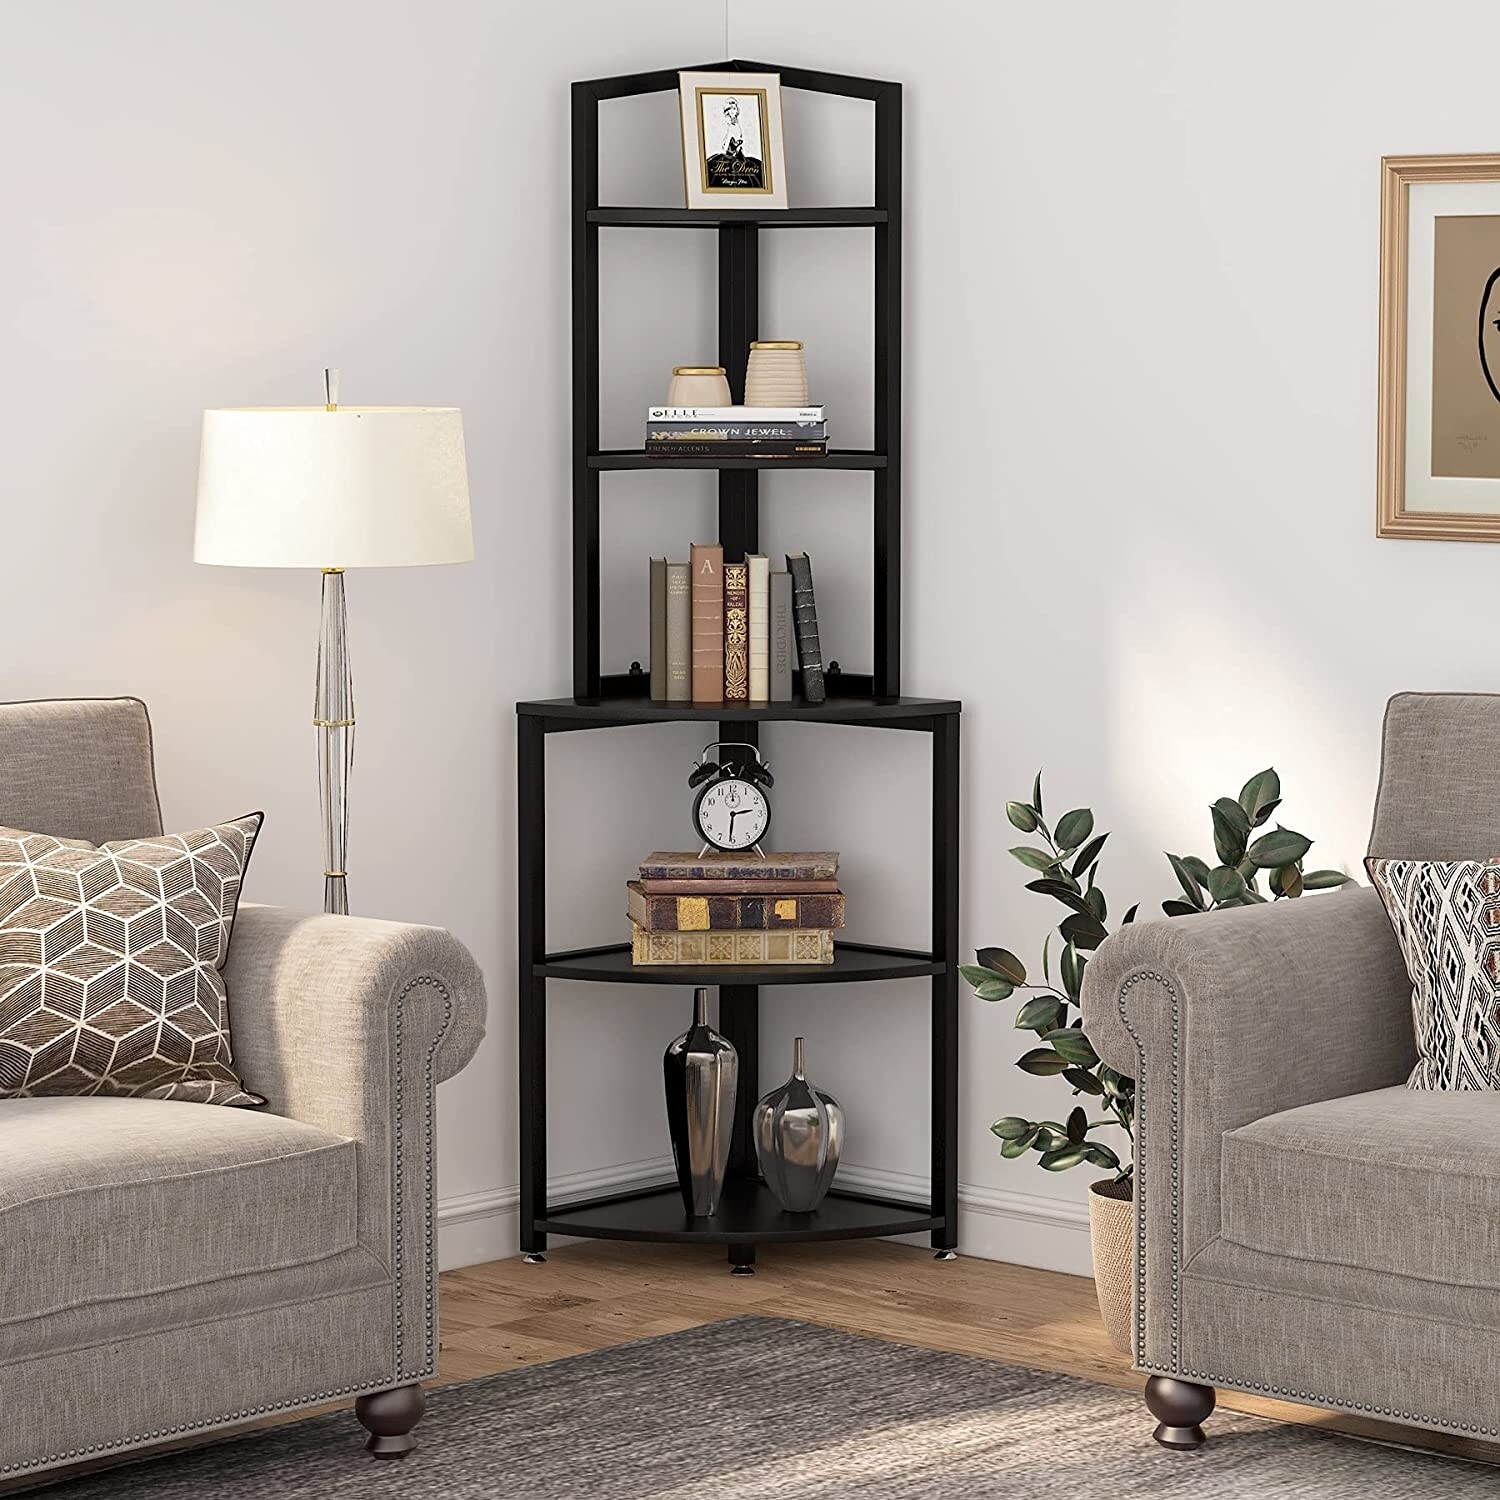 https://ak1.ostkcdn.com/images/products/is/images/direct/4c54ebfd70b1fc02febcd729d6bcf5b20e96002f/60-Inch-Tall-Corner-Shelf%2C-5-Tier-Small-Bookcase%2C-Industrial-Plant-Stand-for-Living-Room%2C-Bedroom%2C-Home-Office.jpg